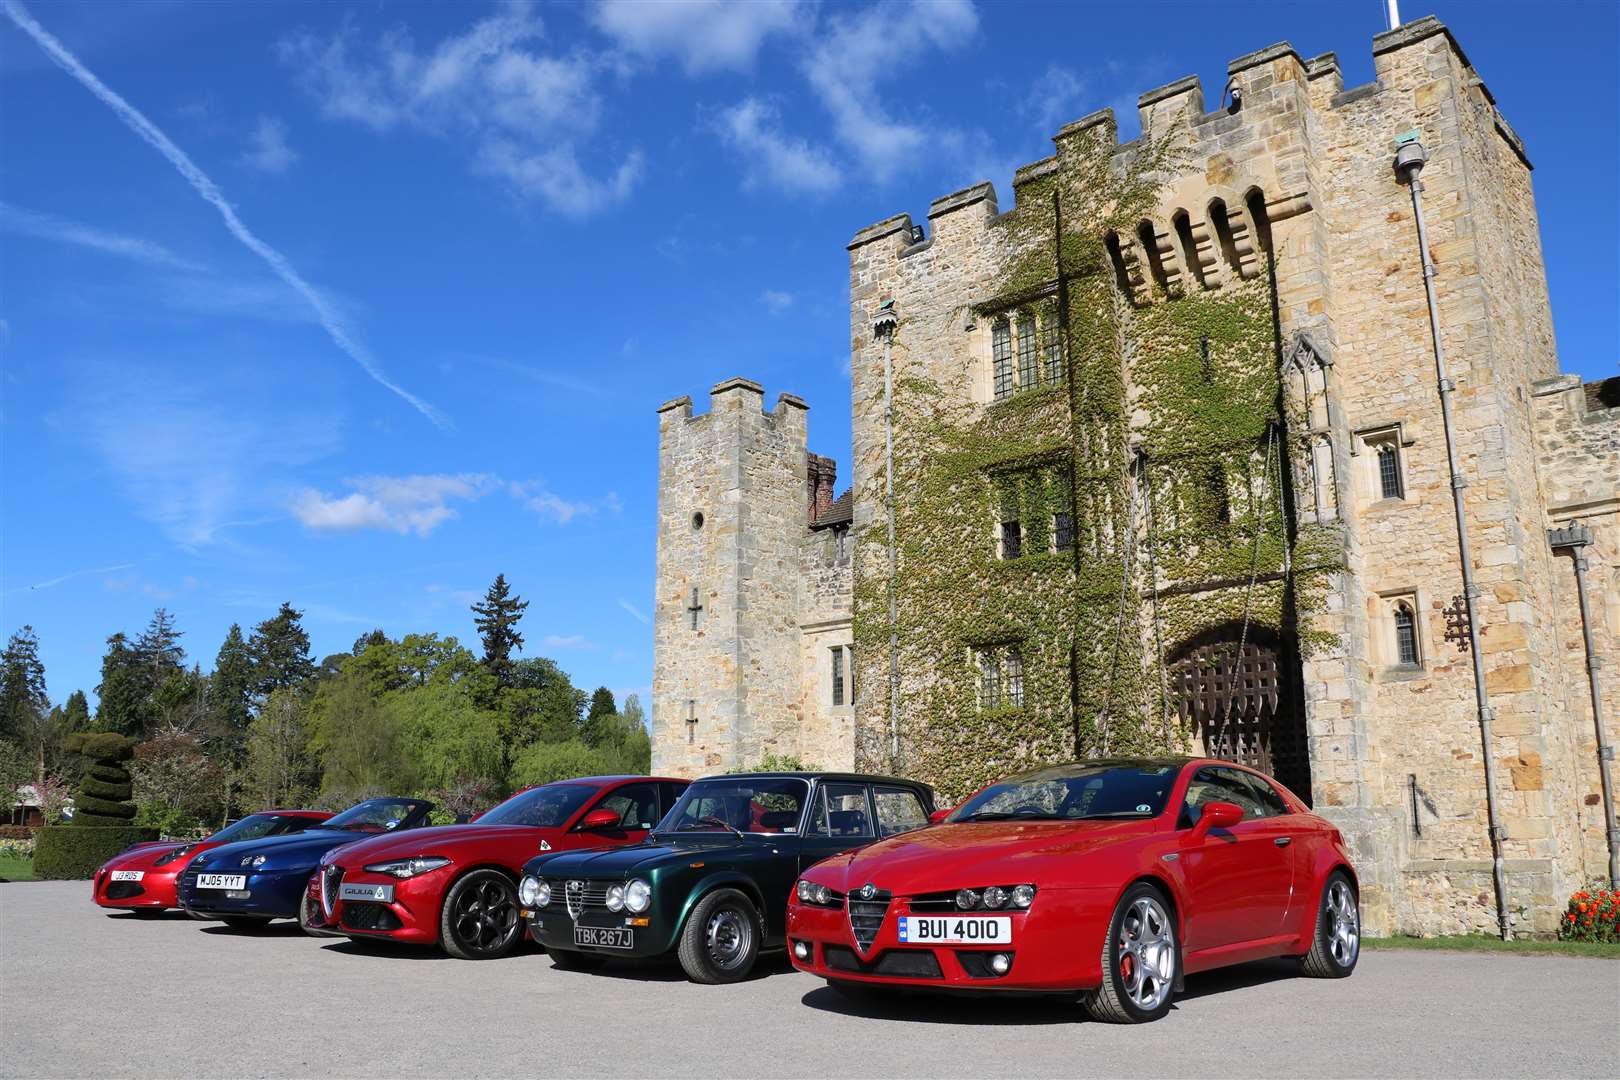 Enjoy classic cars in classic surroundings. Picture courtesy of Hever Castle & Gardens